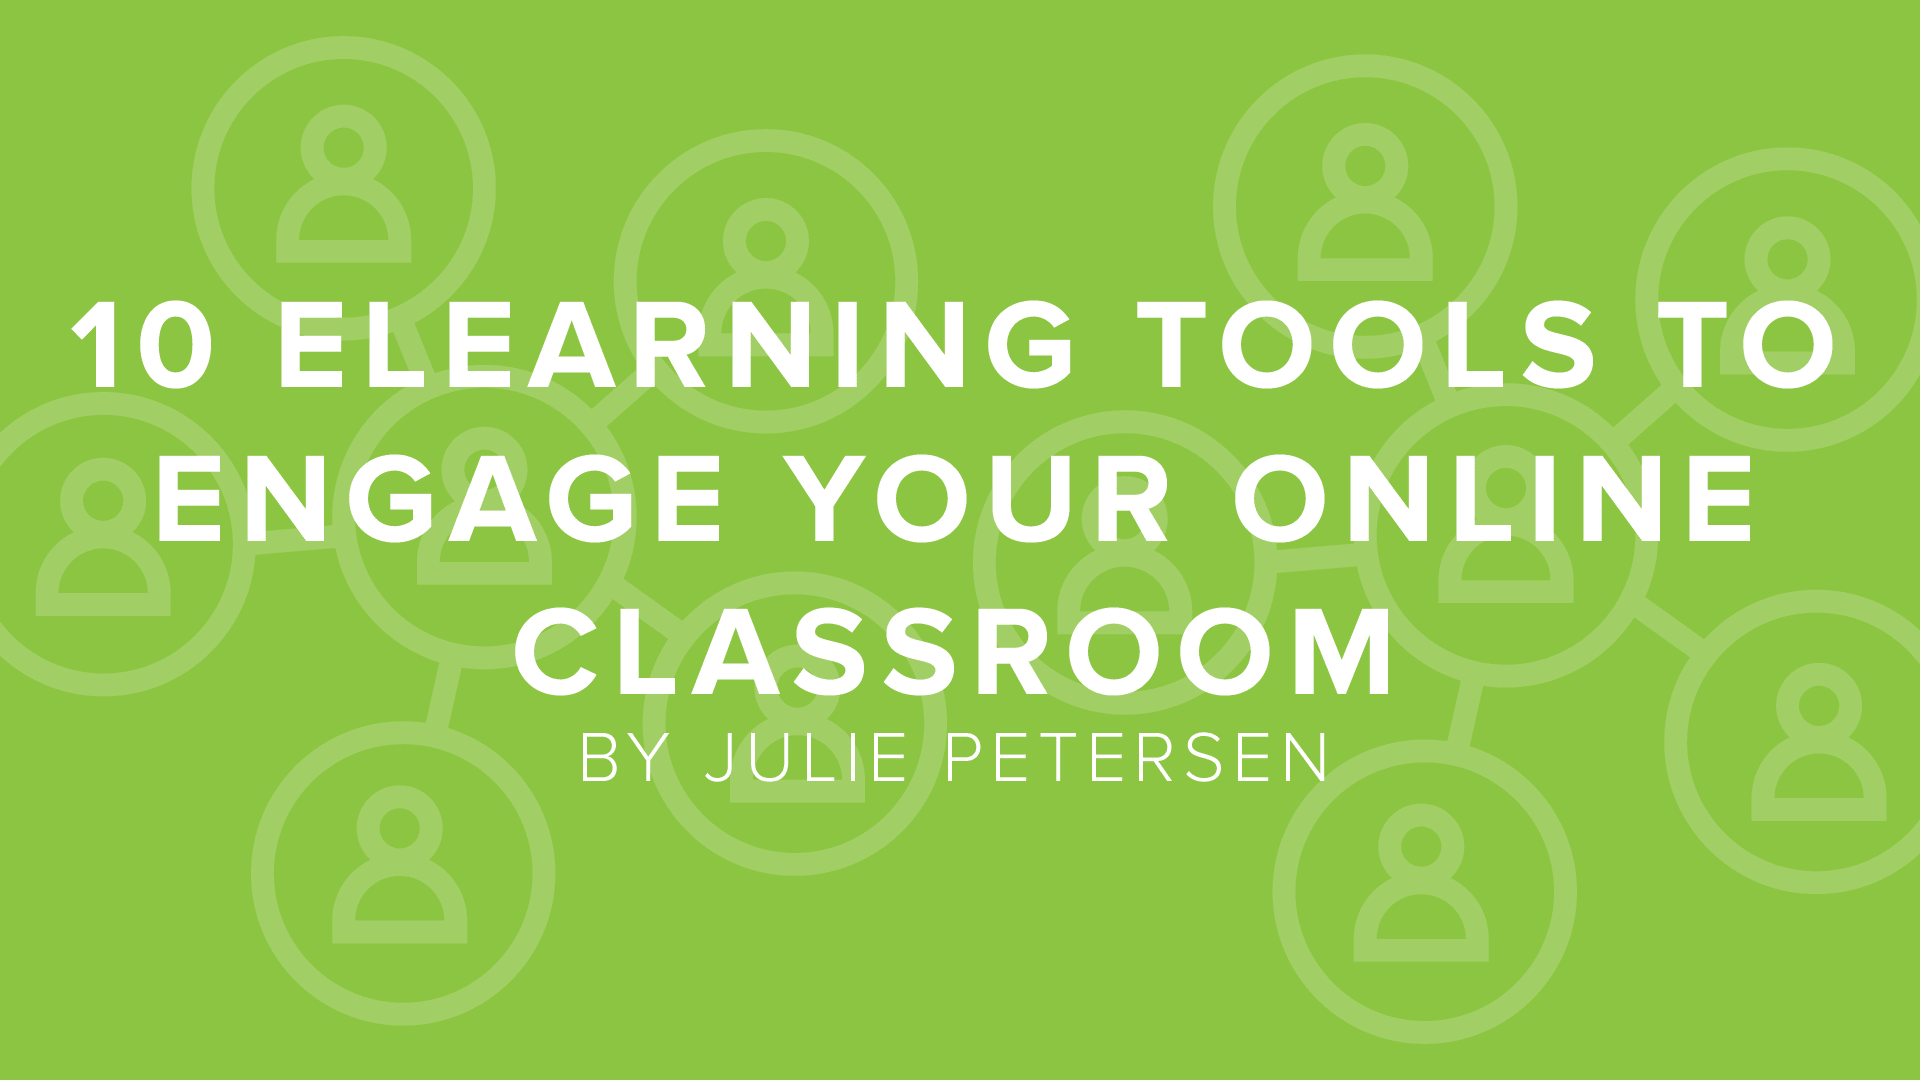 DigitalChalk: Engage Your Online Classroom With These 10 eLearning Tools by Julie Petersen